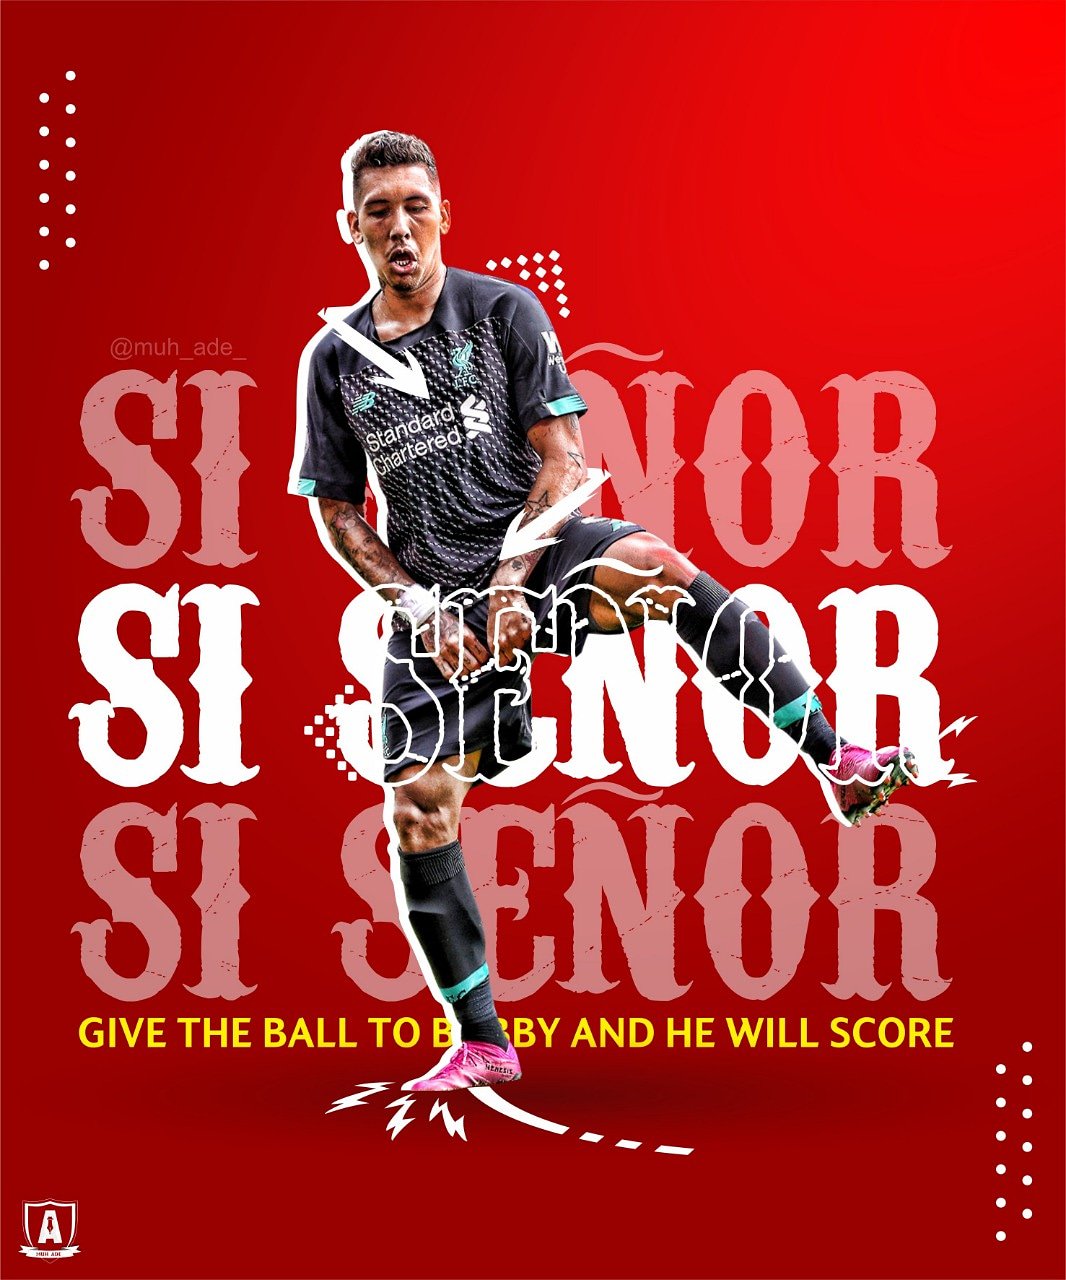 Matematisk stavelse Zoom ind Muh Ade on Twitter: "There's something that the Kop want you to know, He's  the best in the world, and his name is Bobby Firmino, Our number 9, Give  him the ball